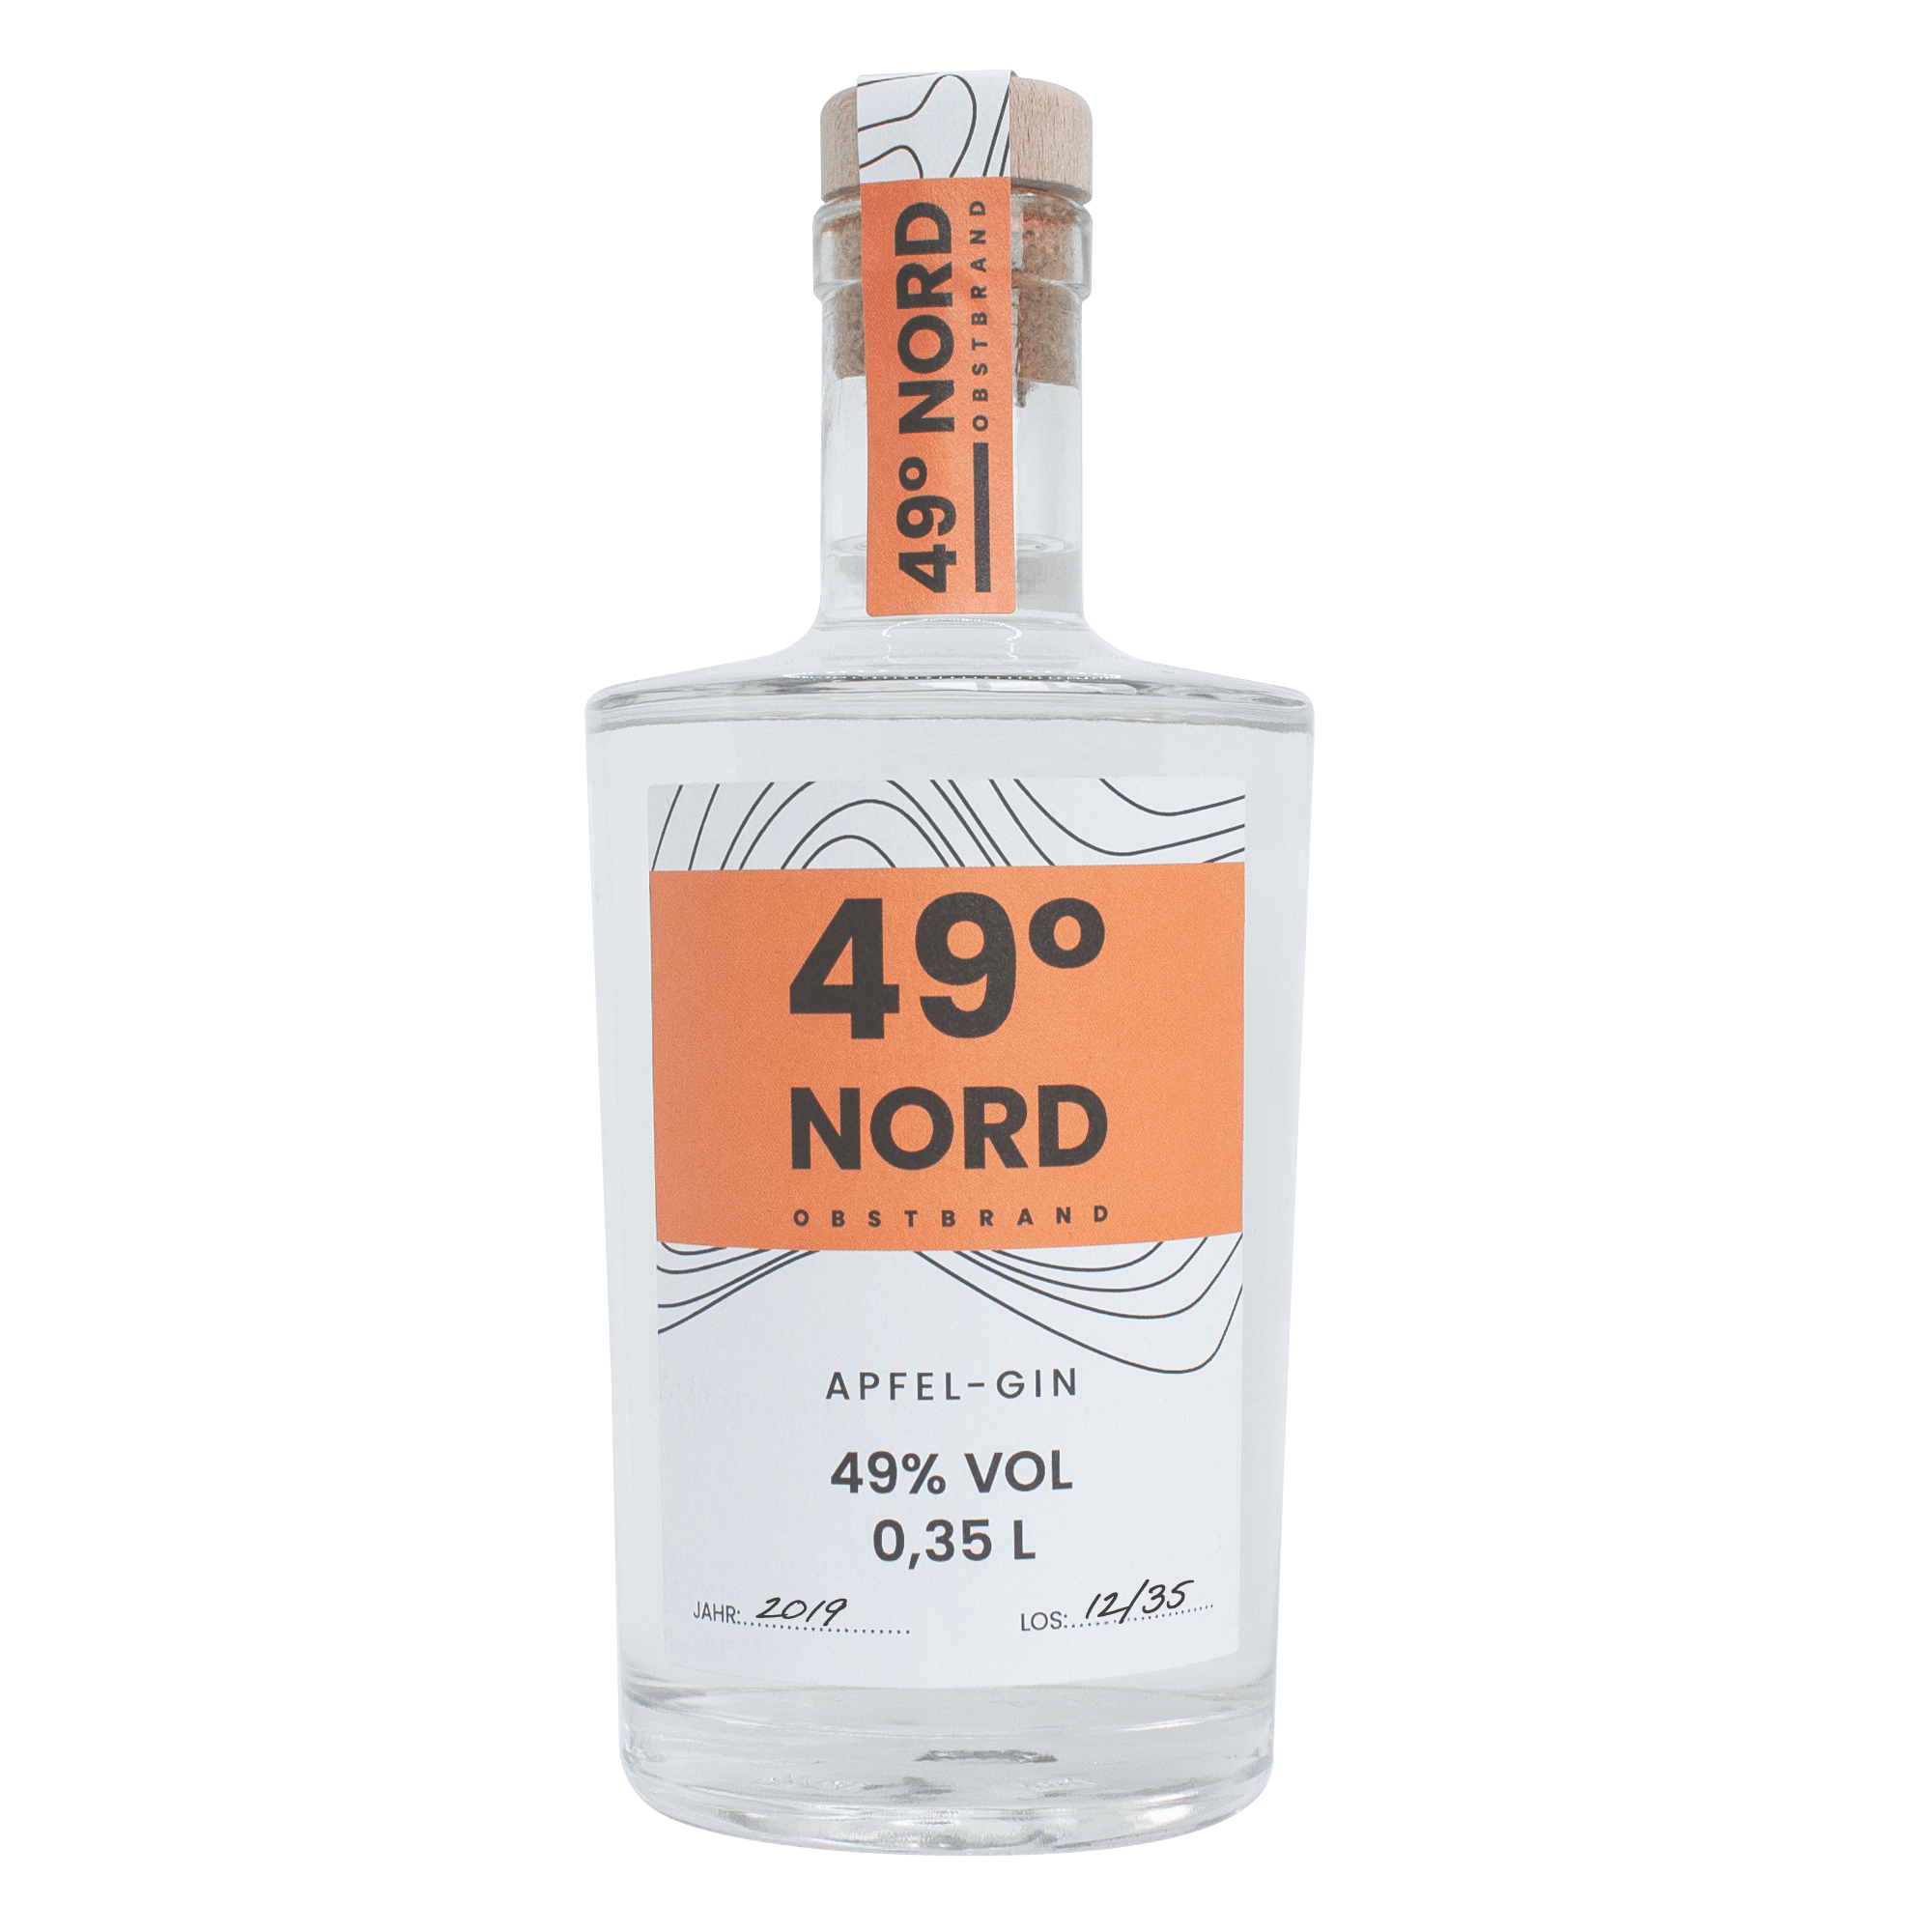 49° Nord Obstbrand Apfel-Gin Nord – 49°